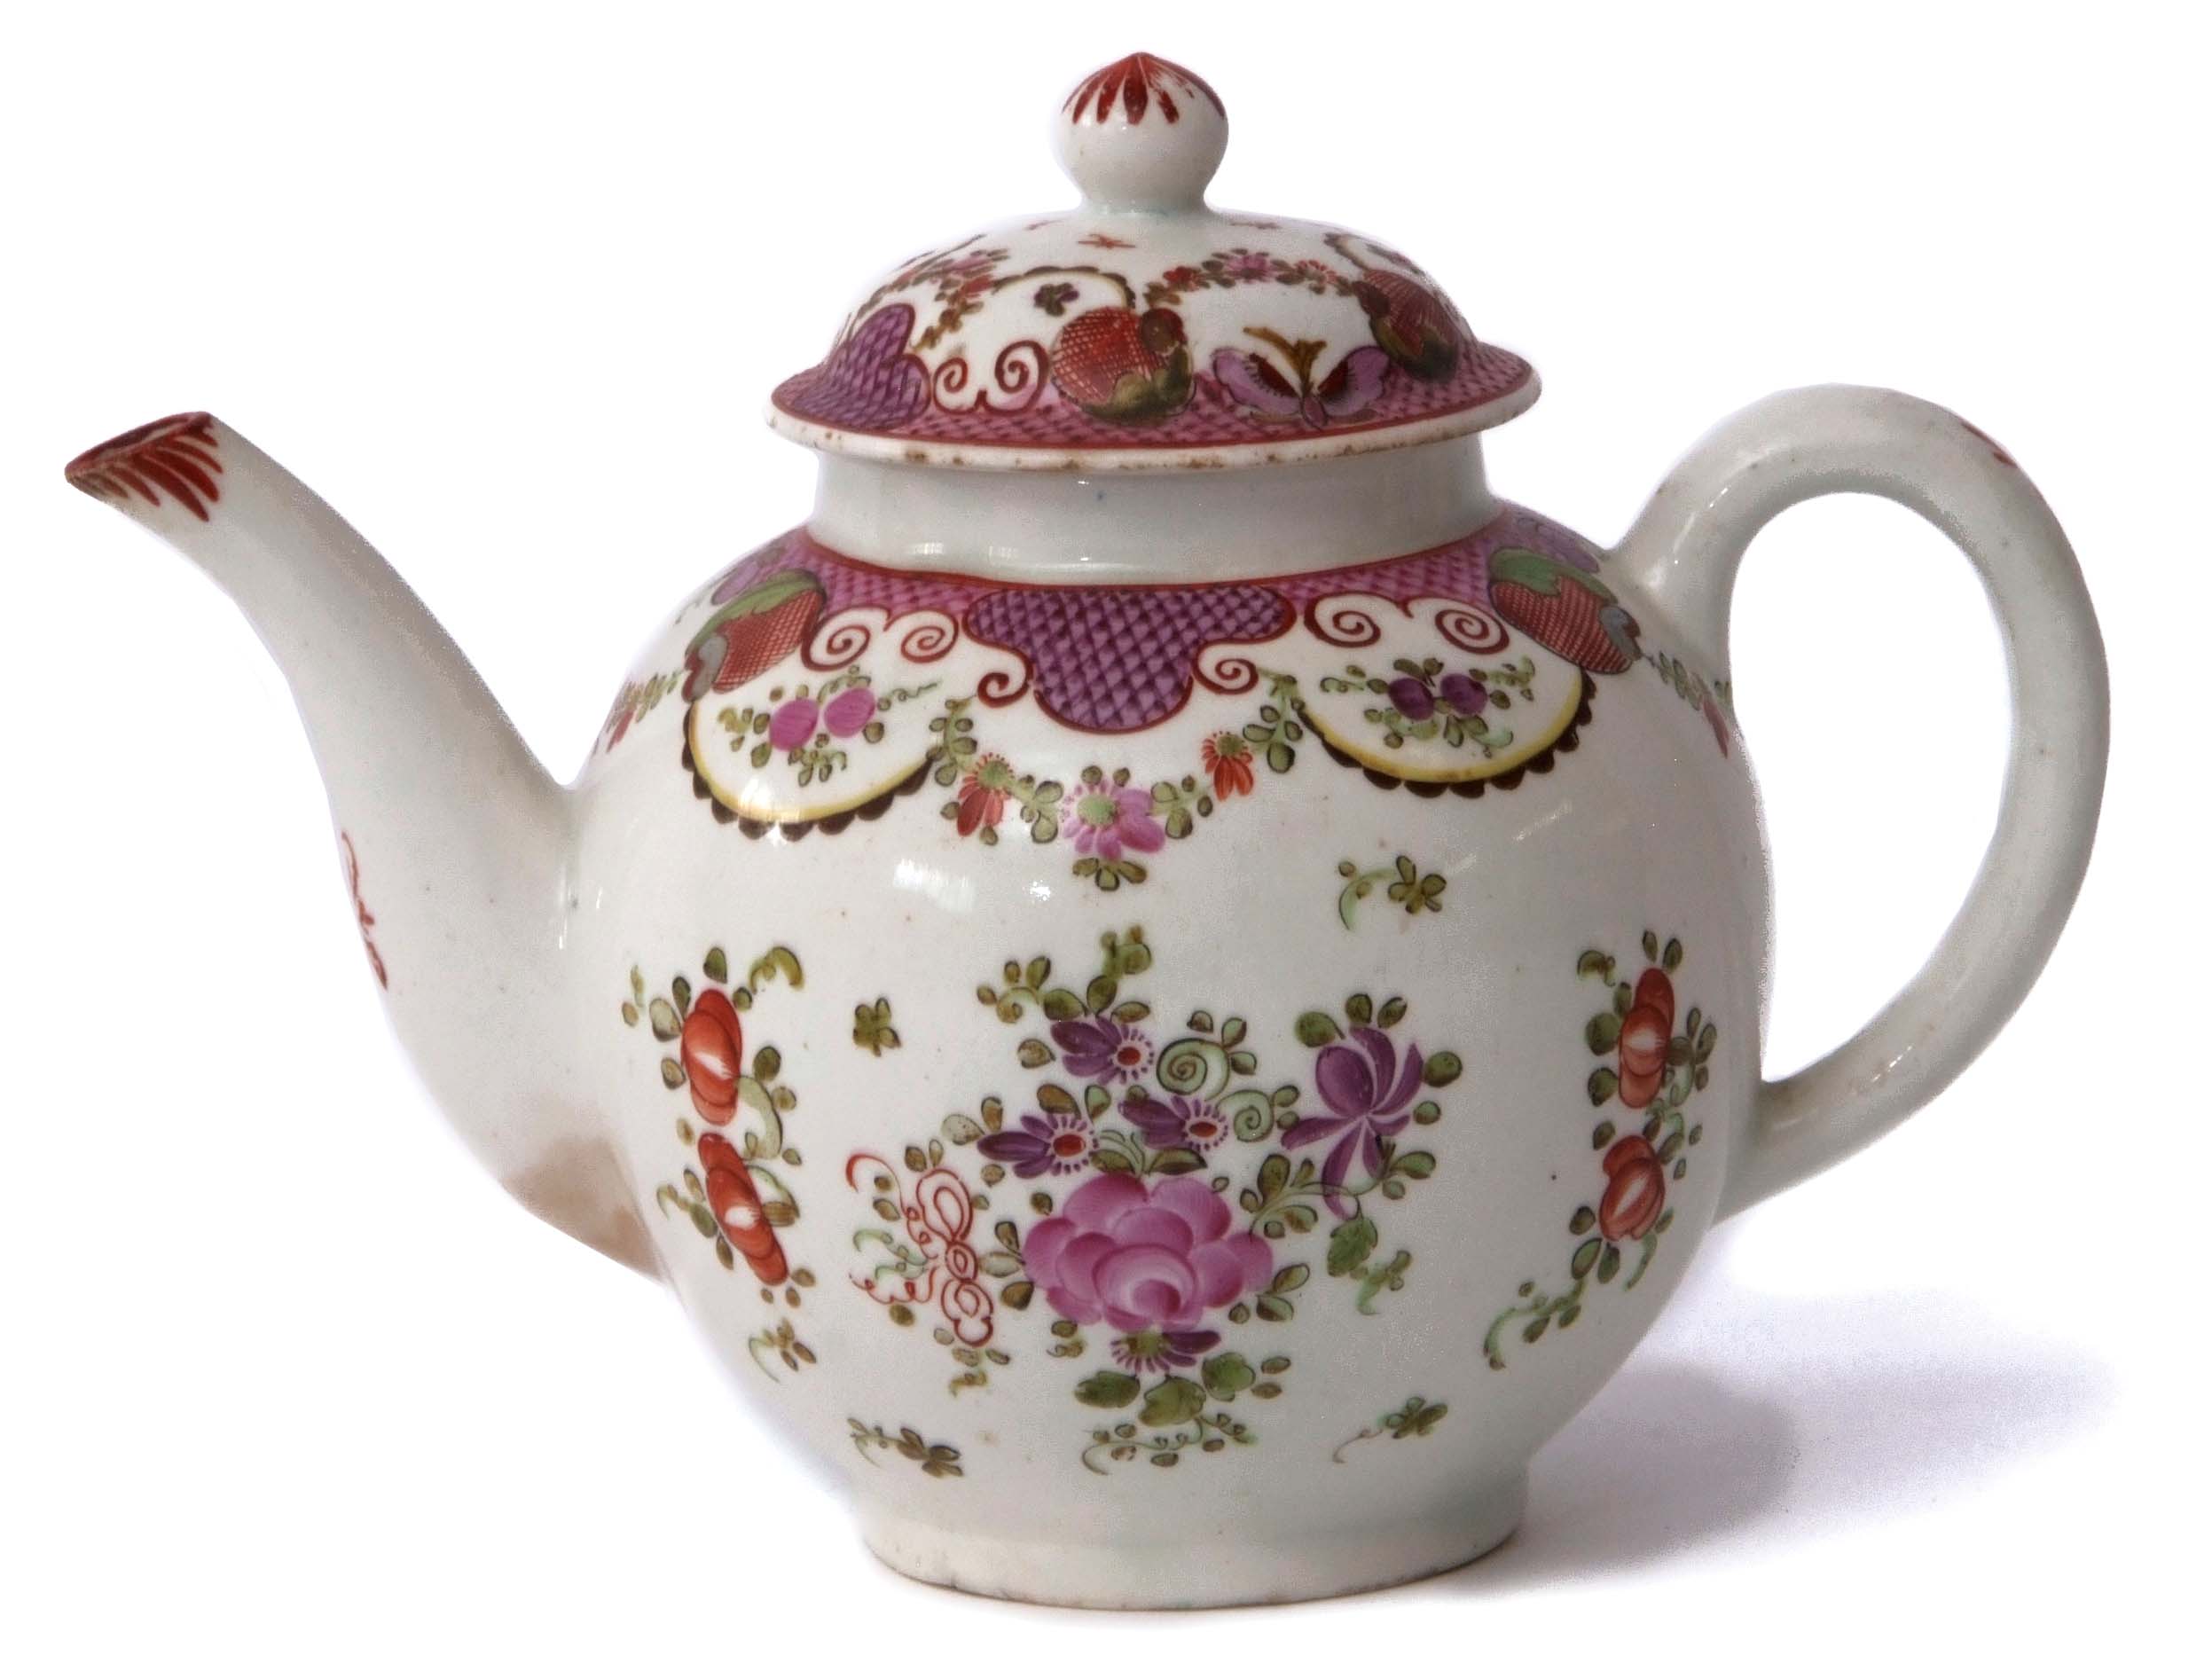 Lowestoft porcelain tea pot and cover circa 1780, decorated in polychrome with a Curtis type design,